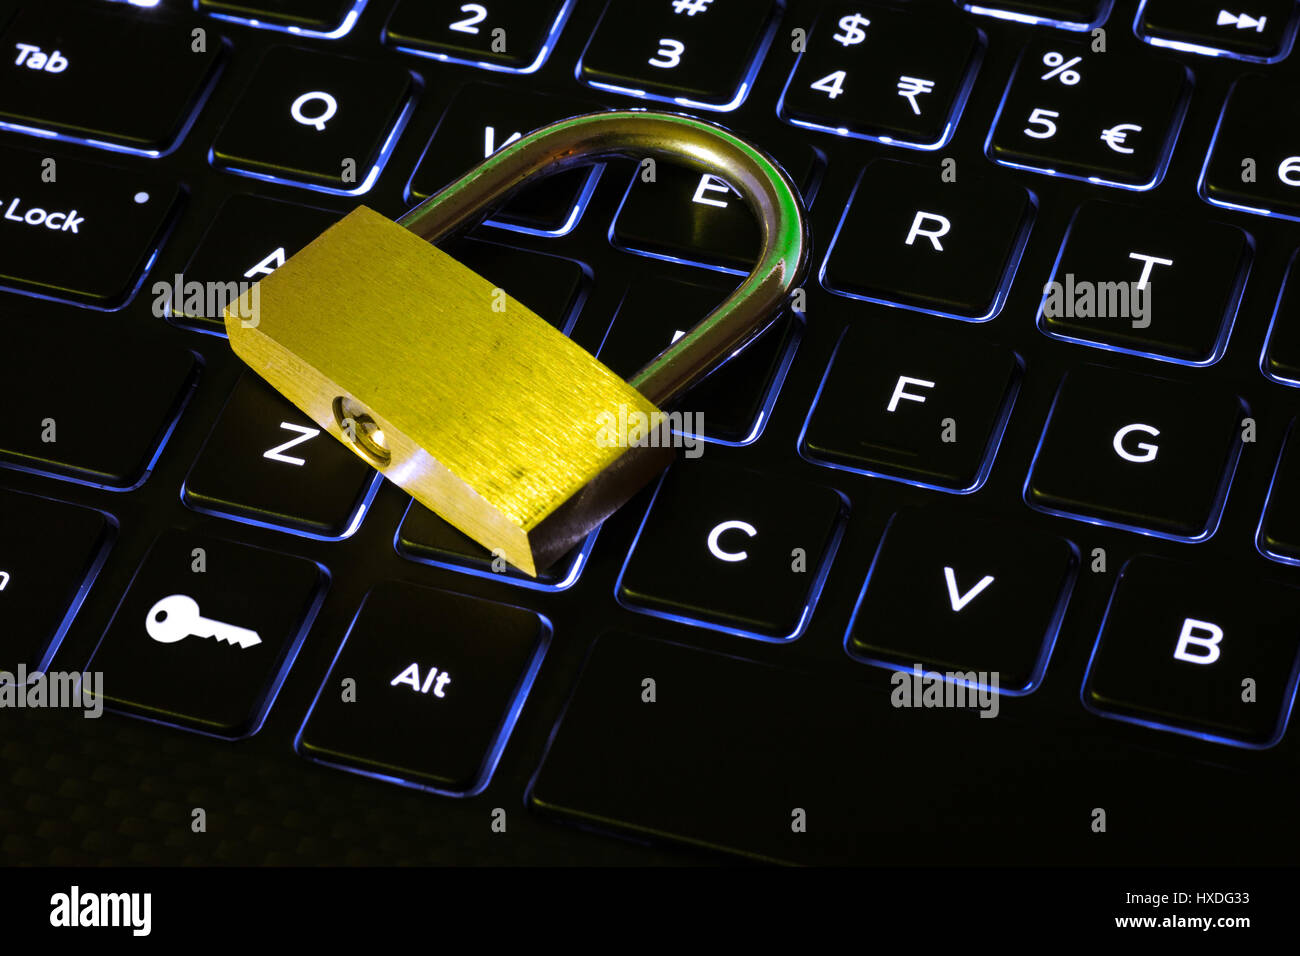 Closed lock and key button on a backlit computer keyboard Stock Photo